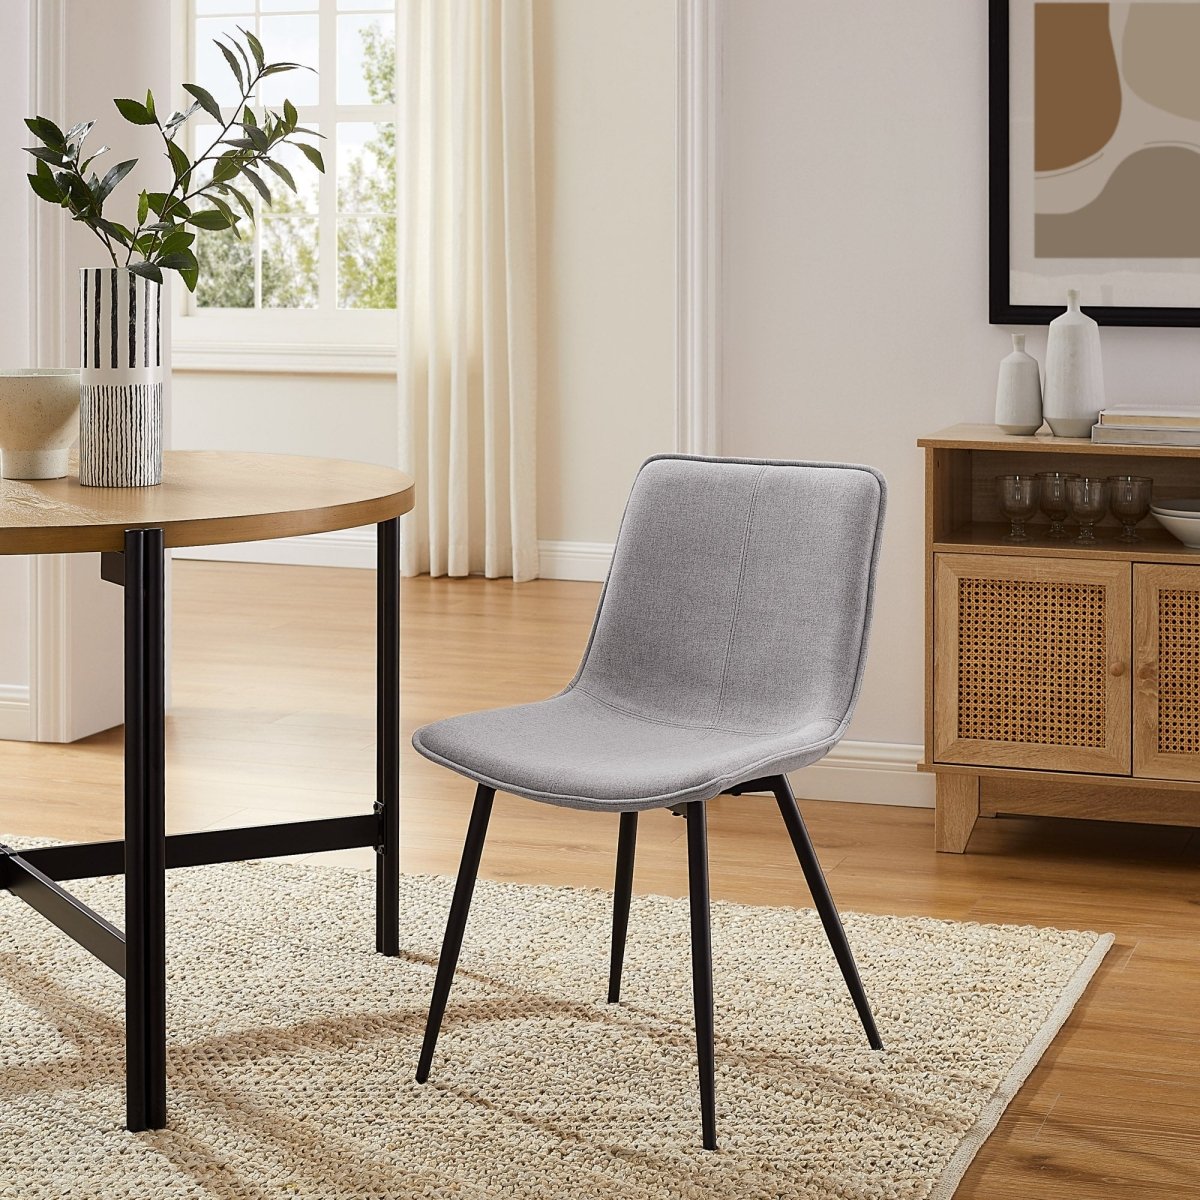 Walker Edison Tribeca Upholstered Dining Chair, Set of 2 - lily & onyx